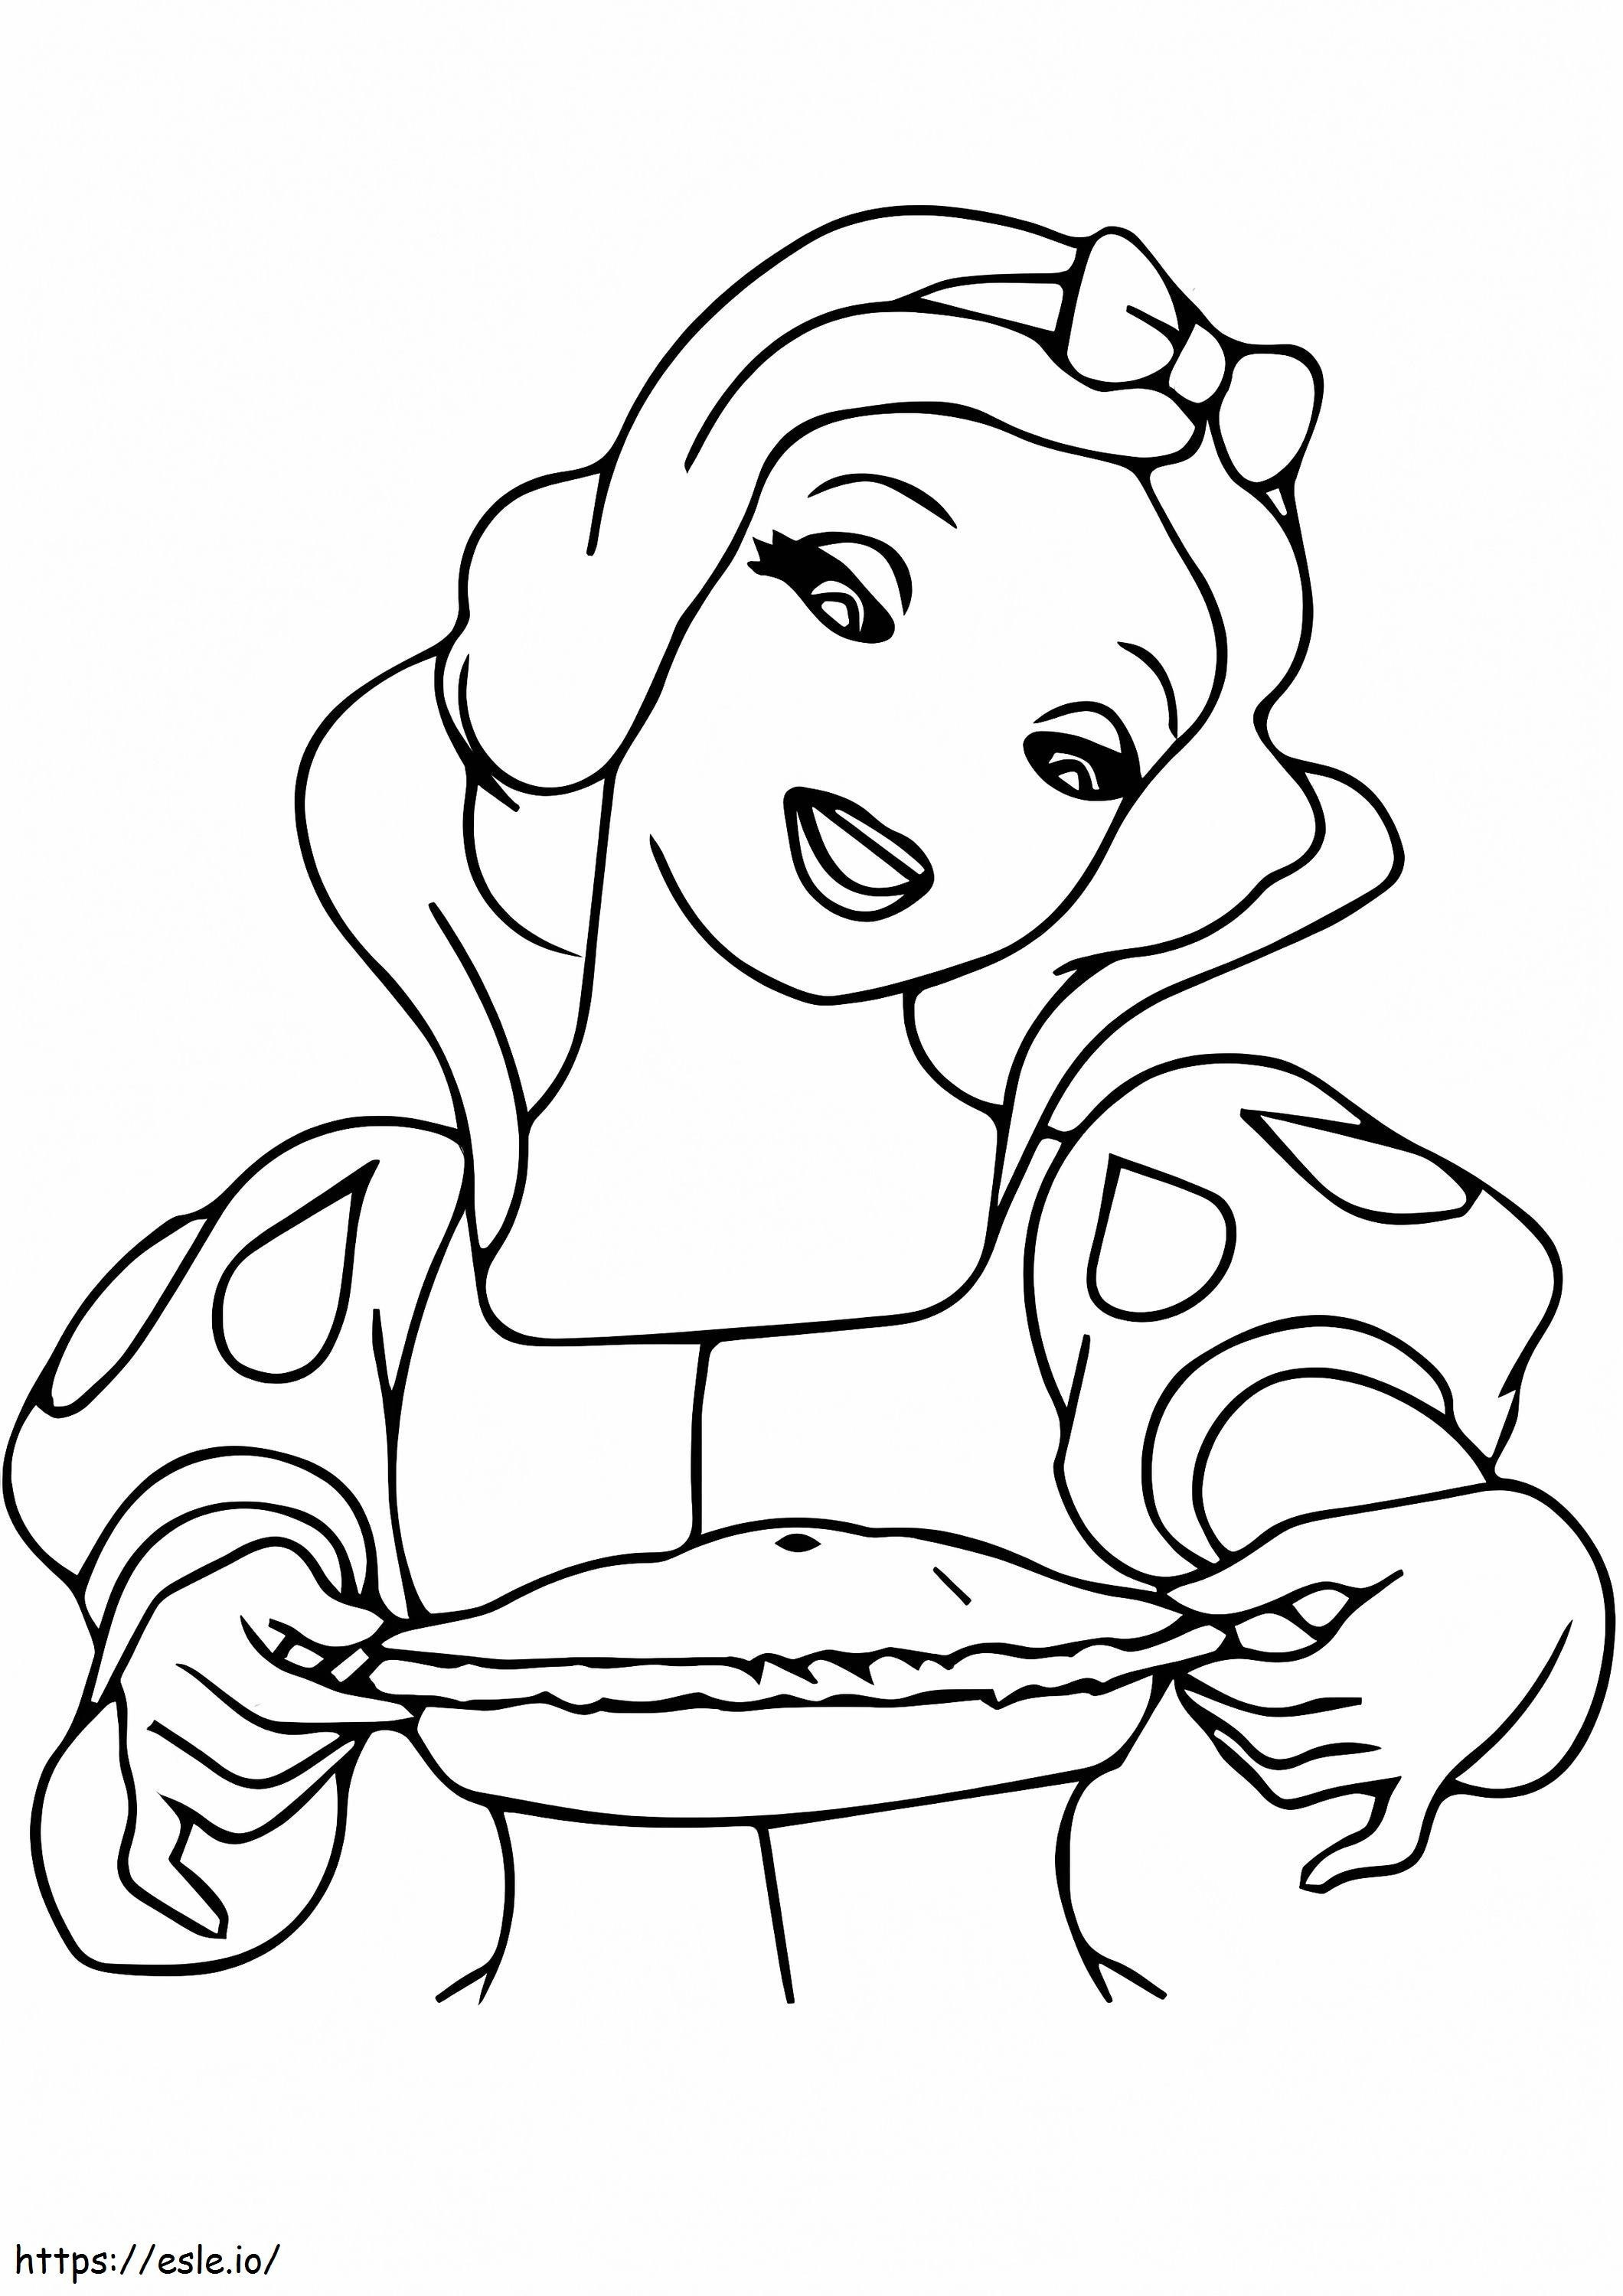 Snow White With Food coloring page